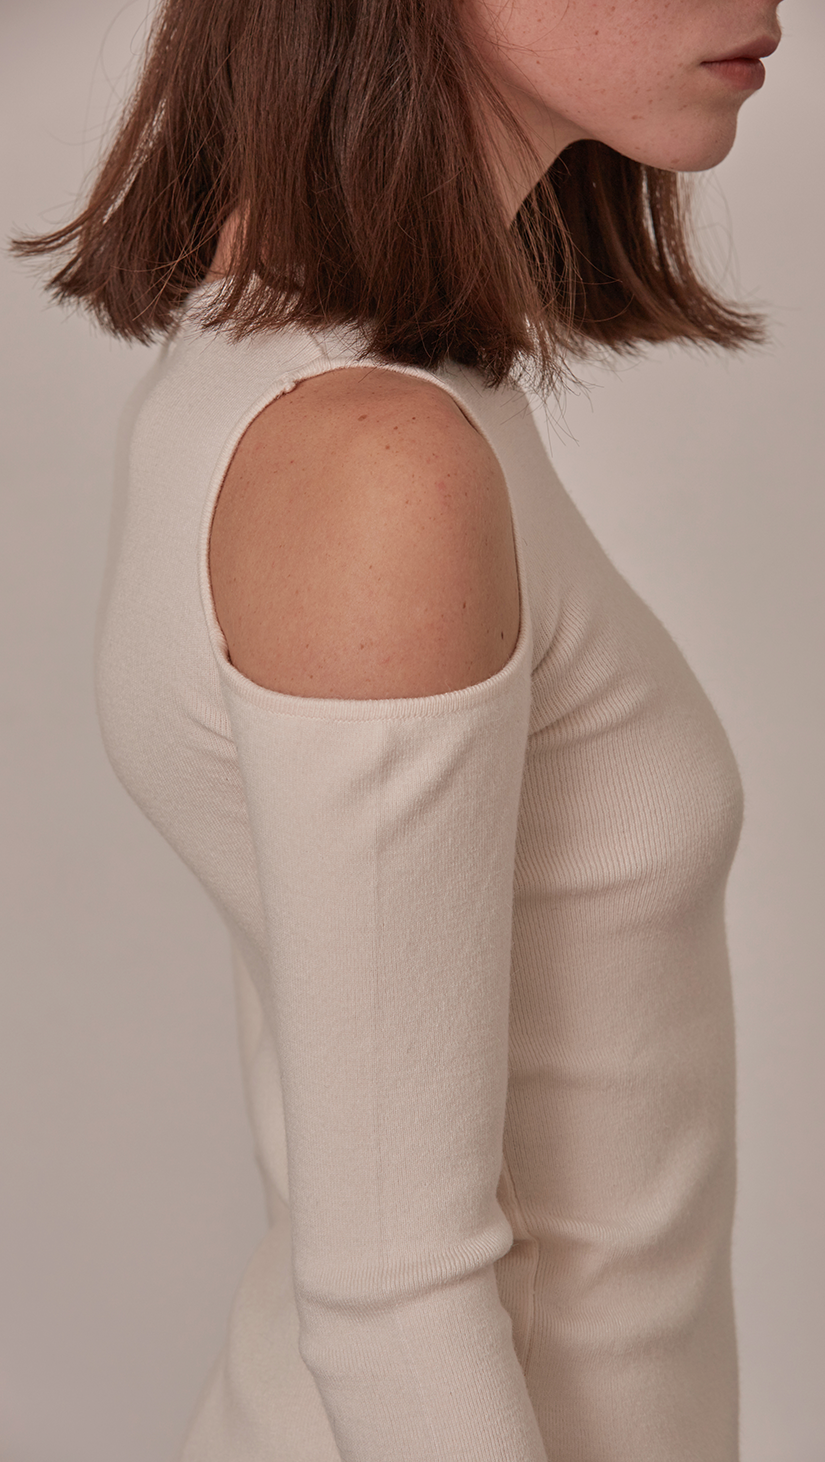 Daija Sweater in Ivory. The slim-cut with lightning slashes cutting through shoulder and creating a flattering buckle opening along side. Self-tied strap on sleeves. Super soft feel. Designed to skim the body.